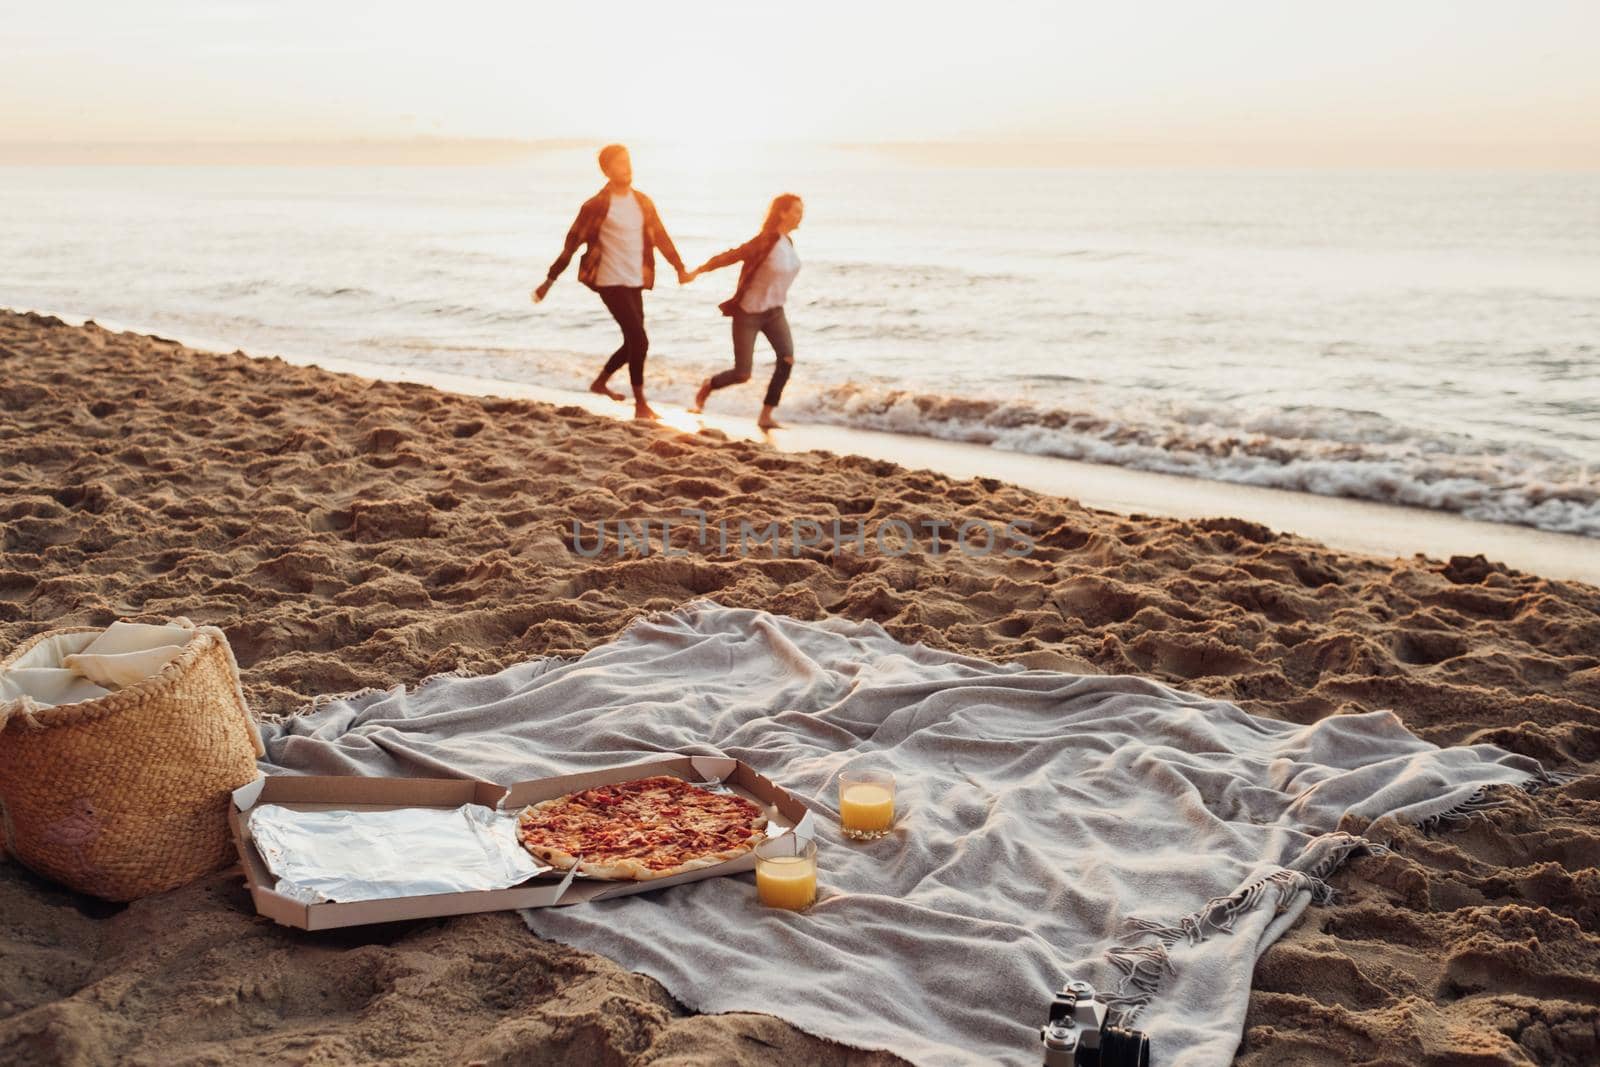 Focus on picnic set with pizza and juice, happy couple, woman and man holding by hands and running along the coastline together on background